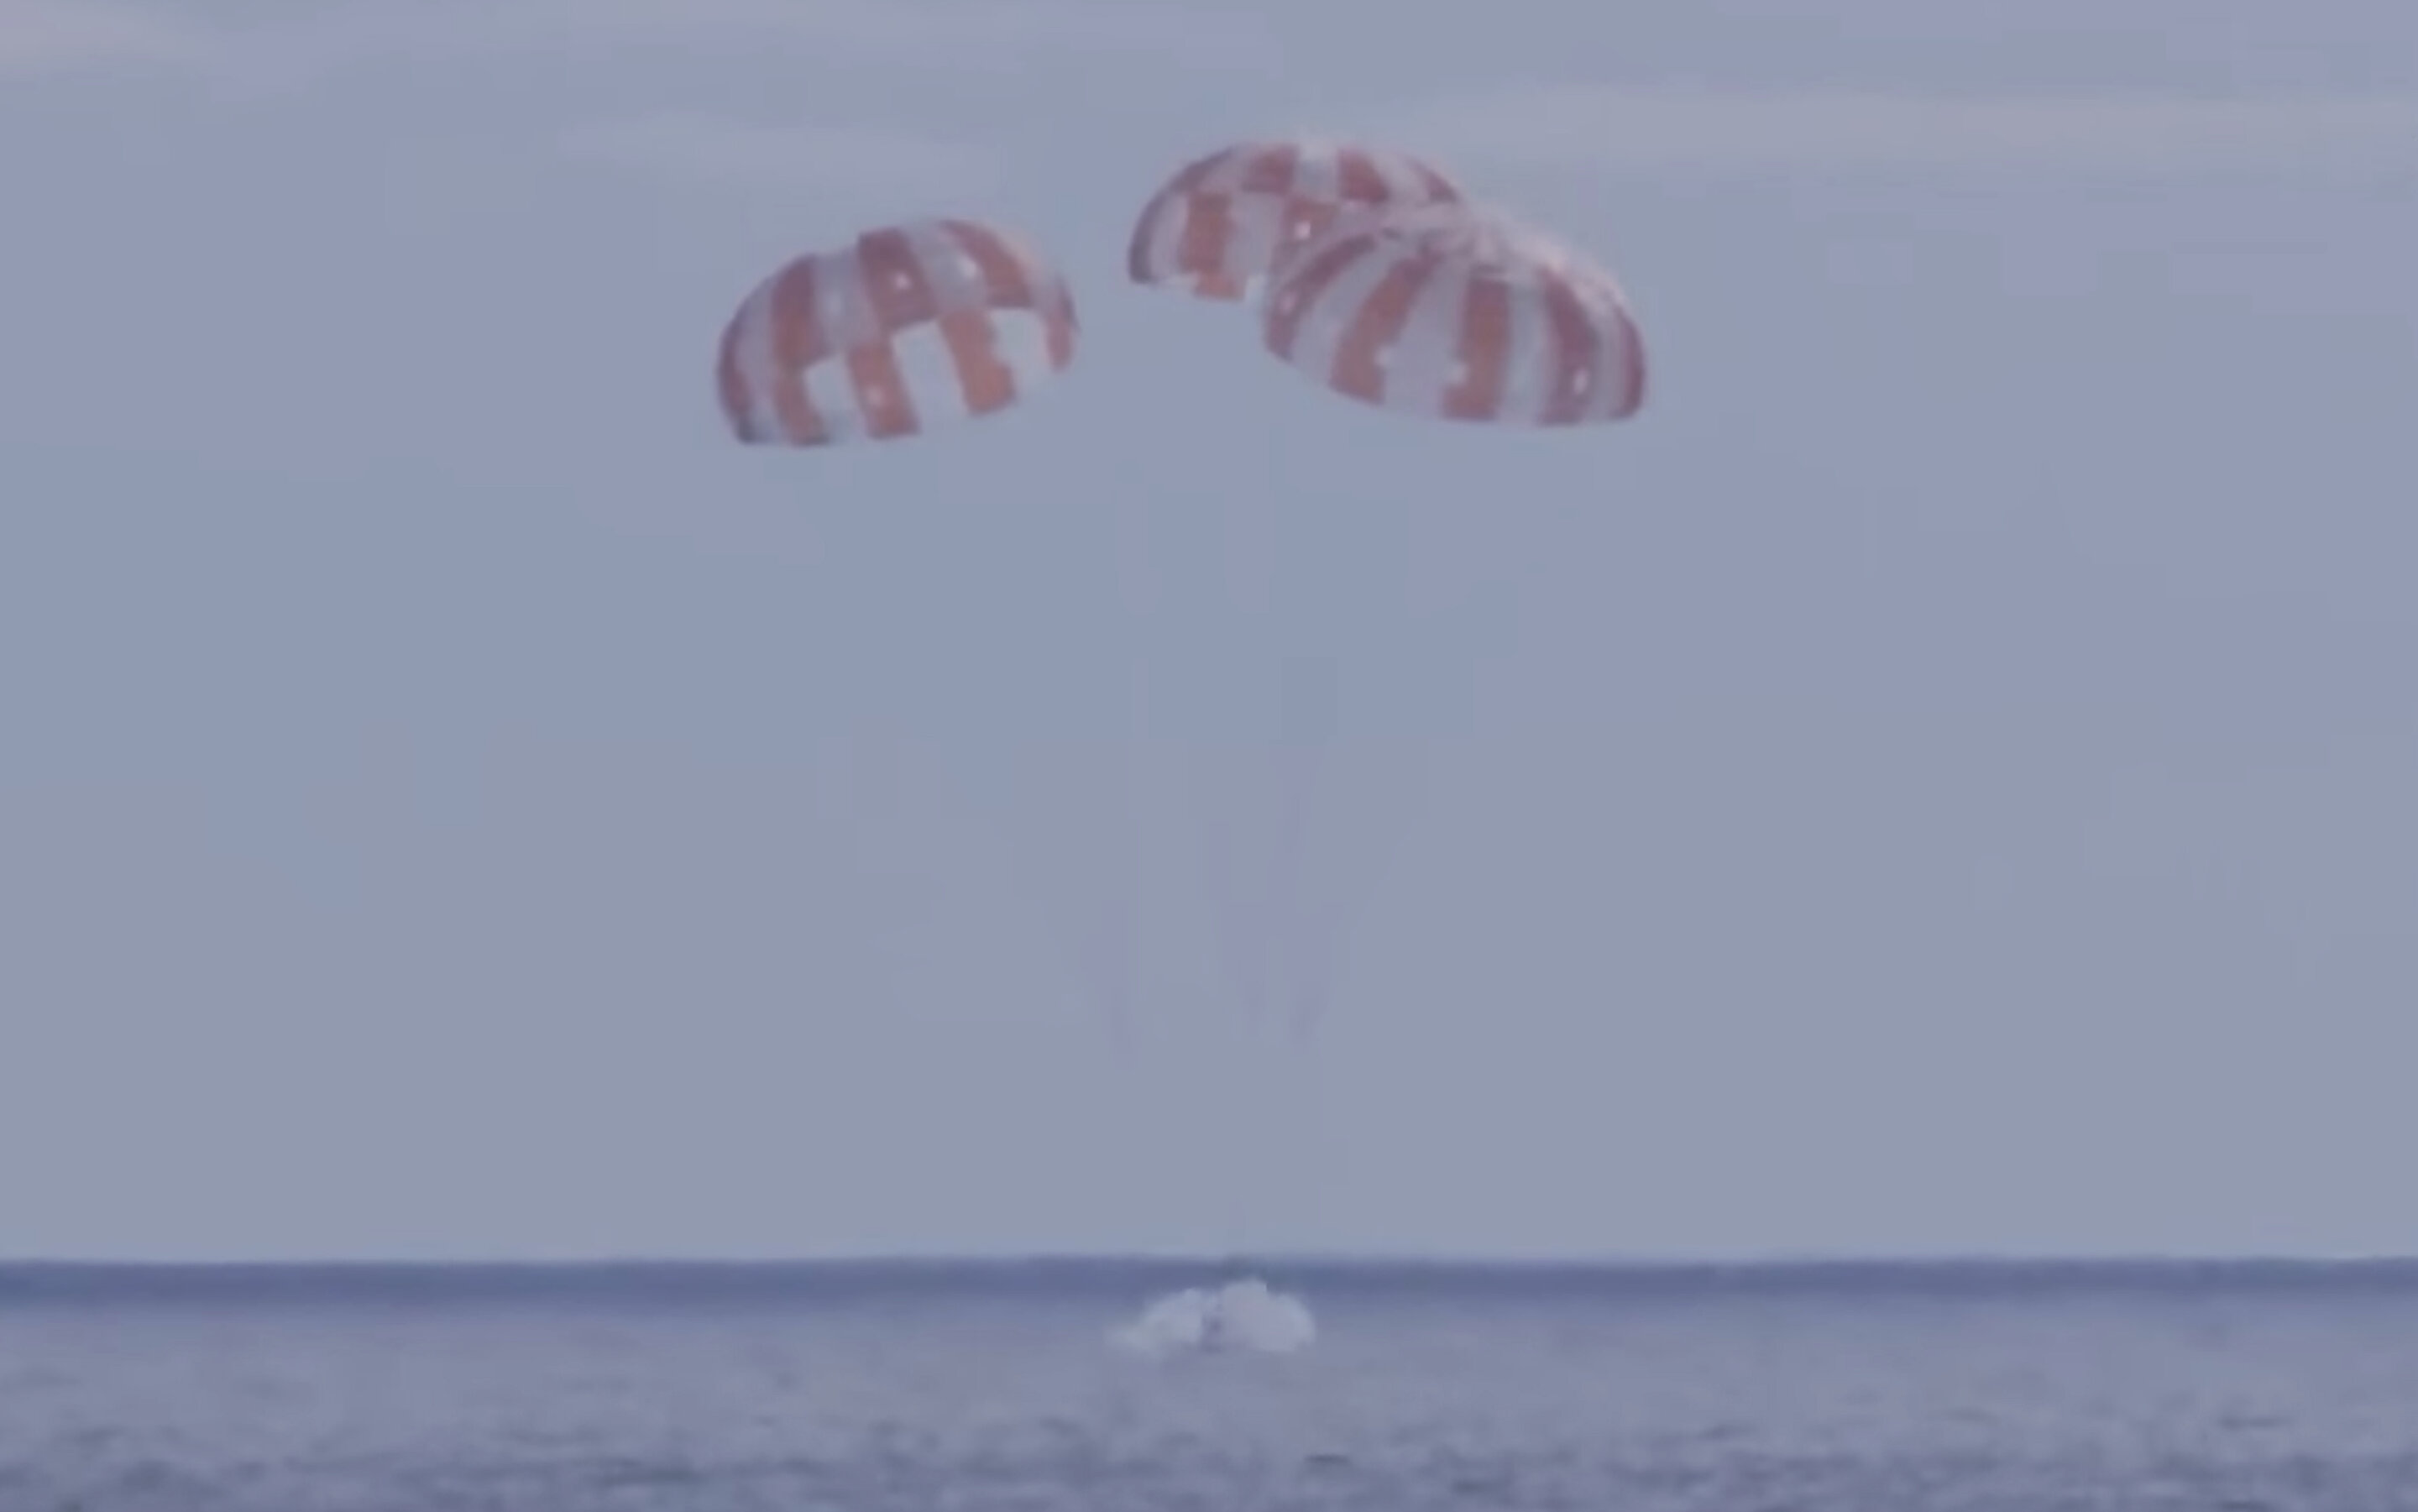 #NASA’s Orion capsule blazes home from test flight to moon